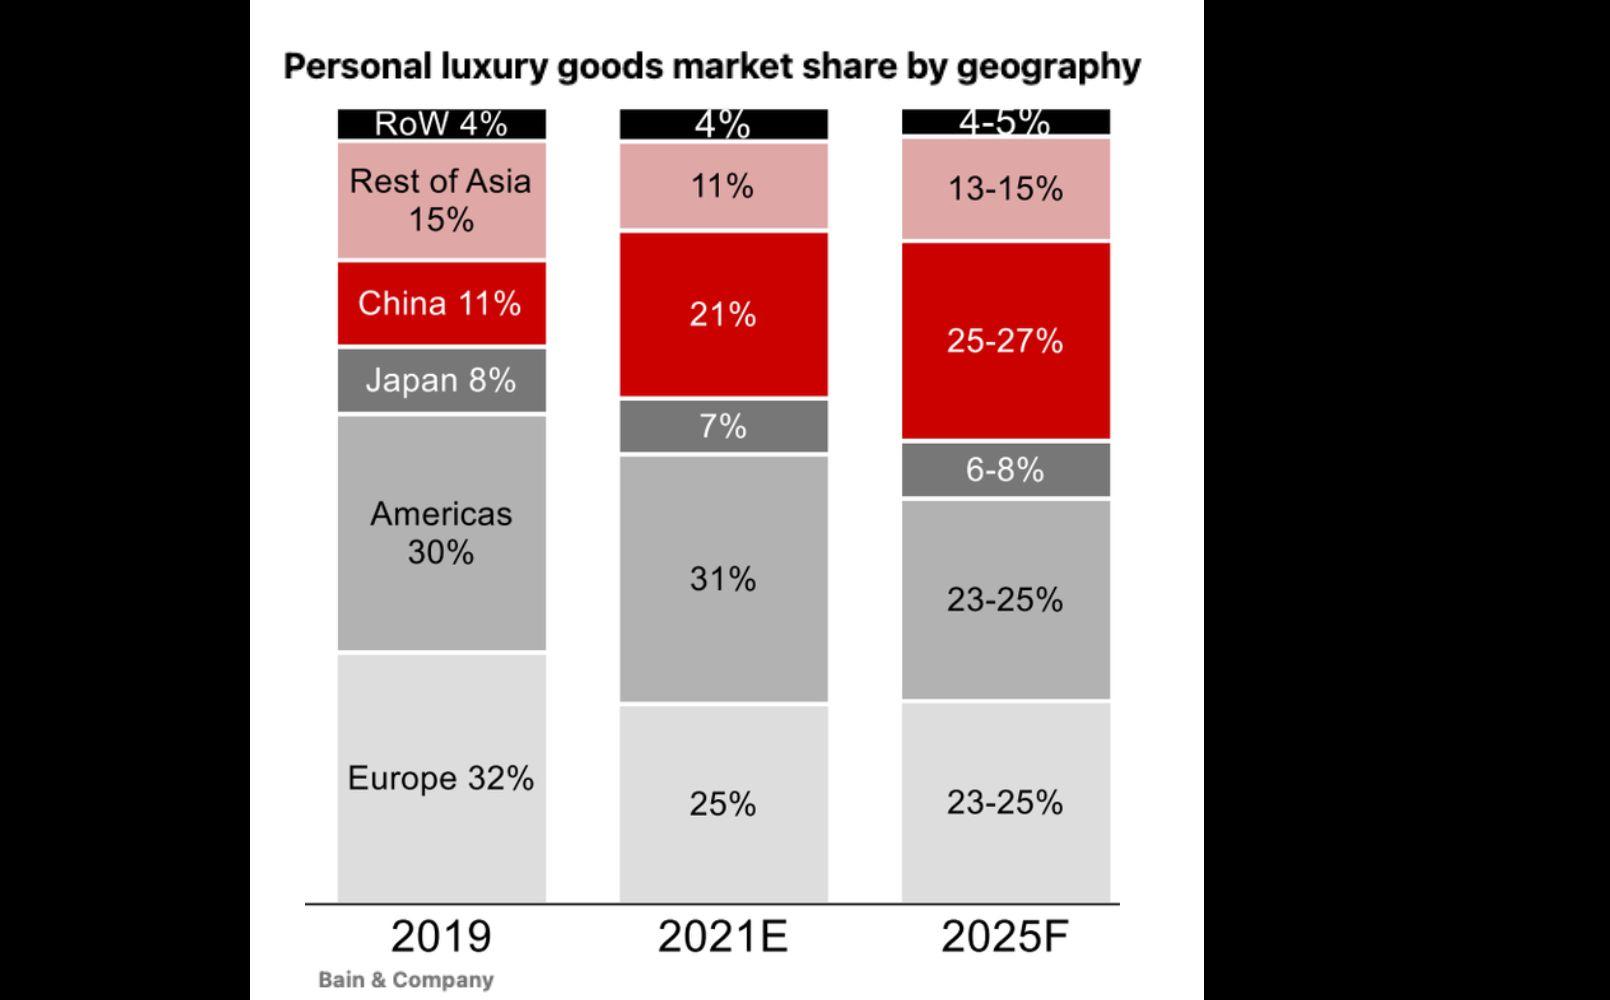 Luxury goods market share by geography